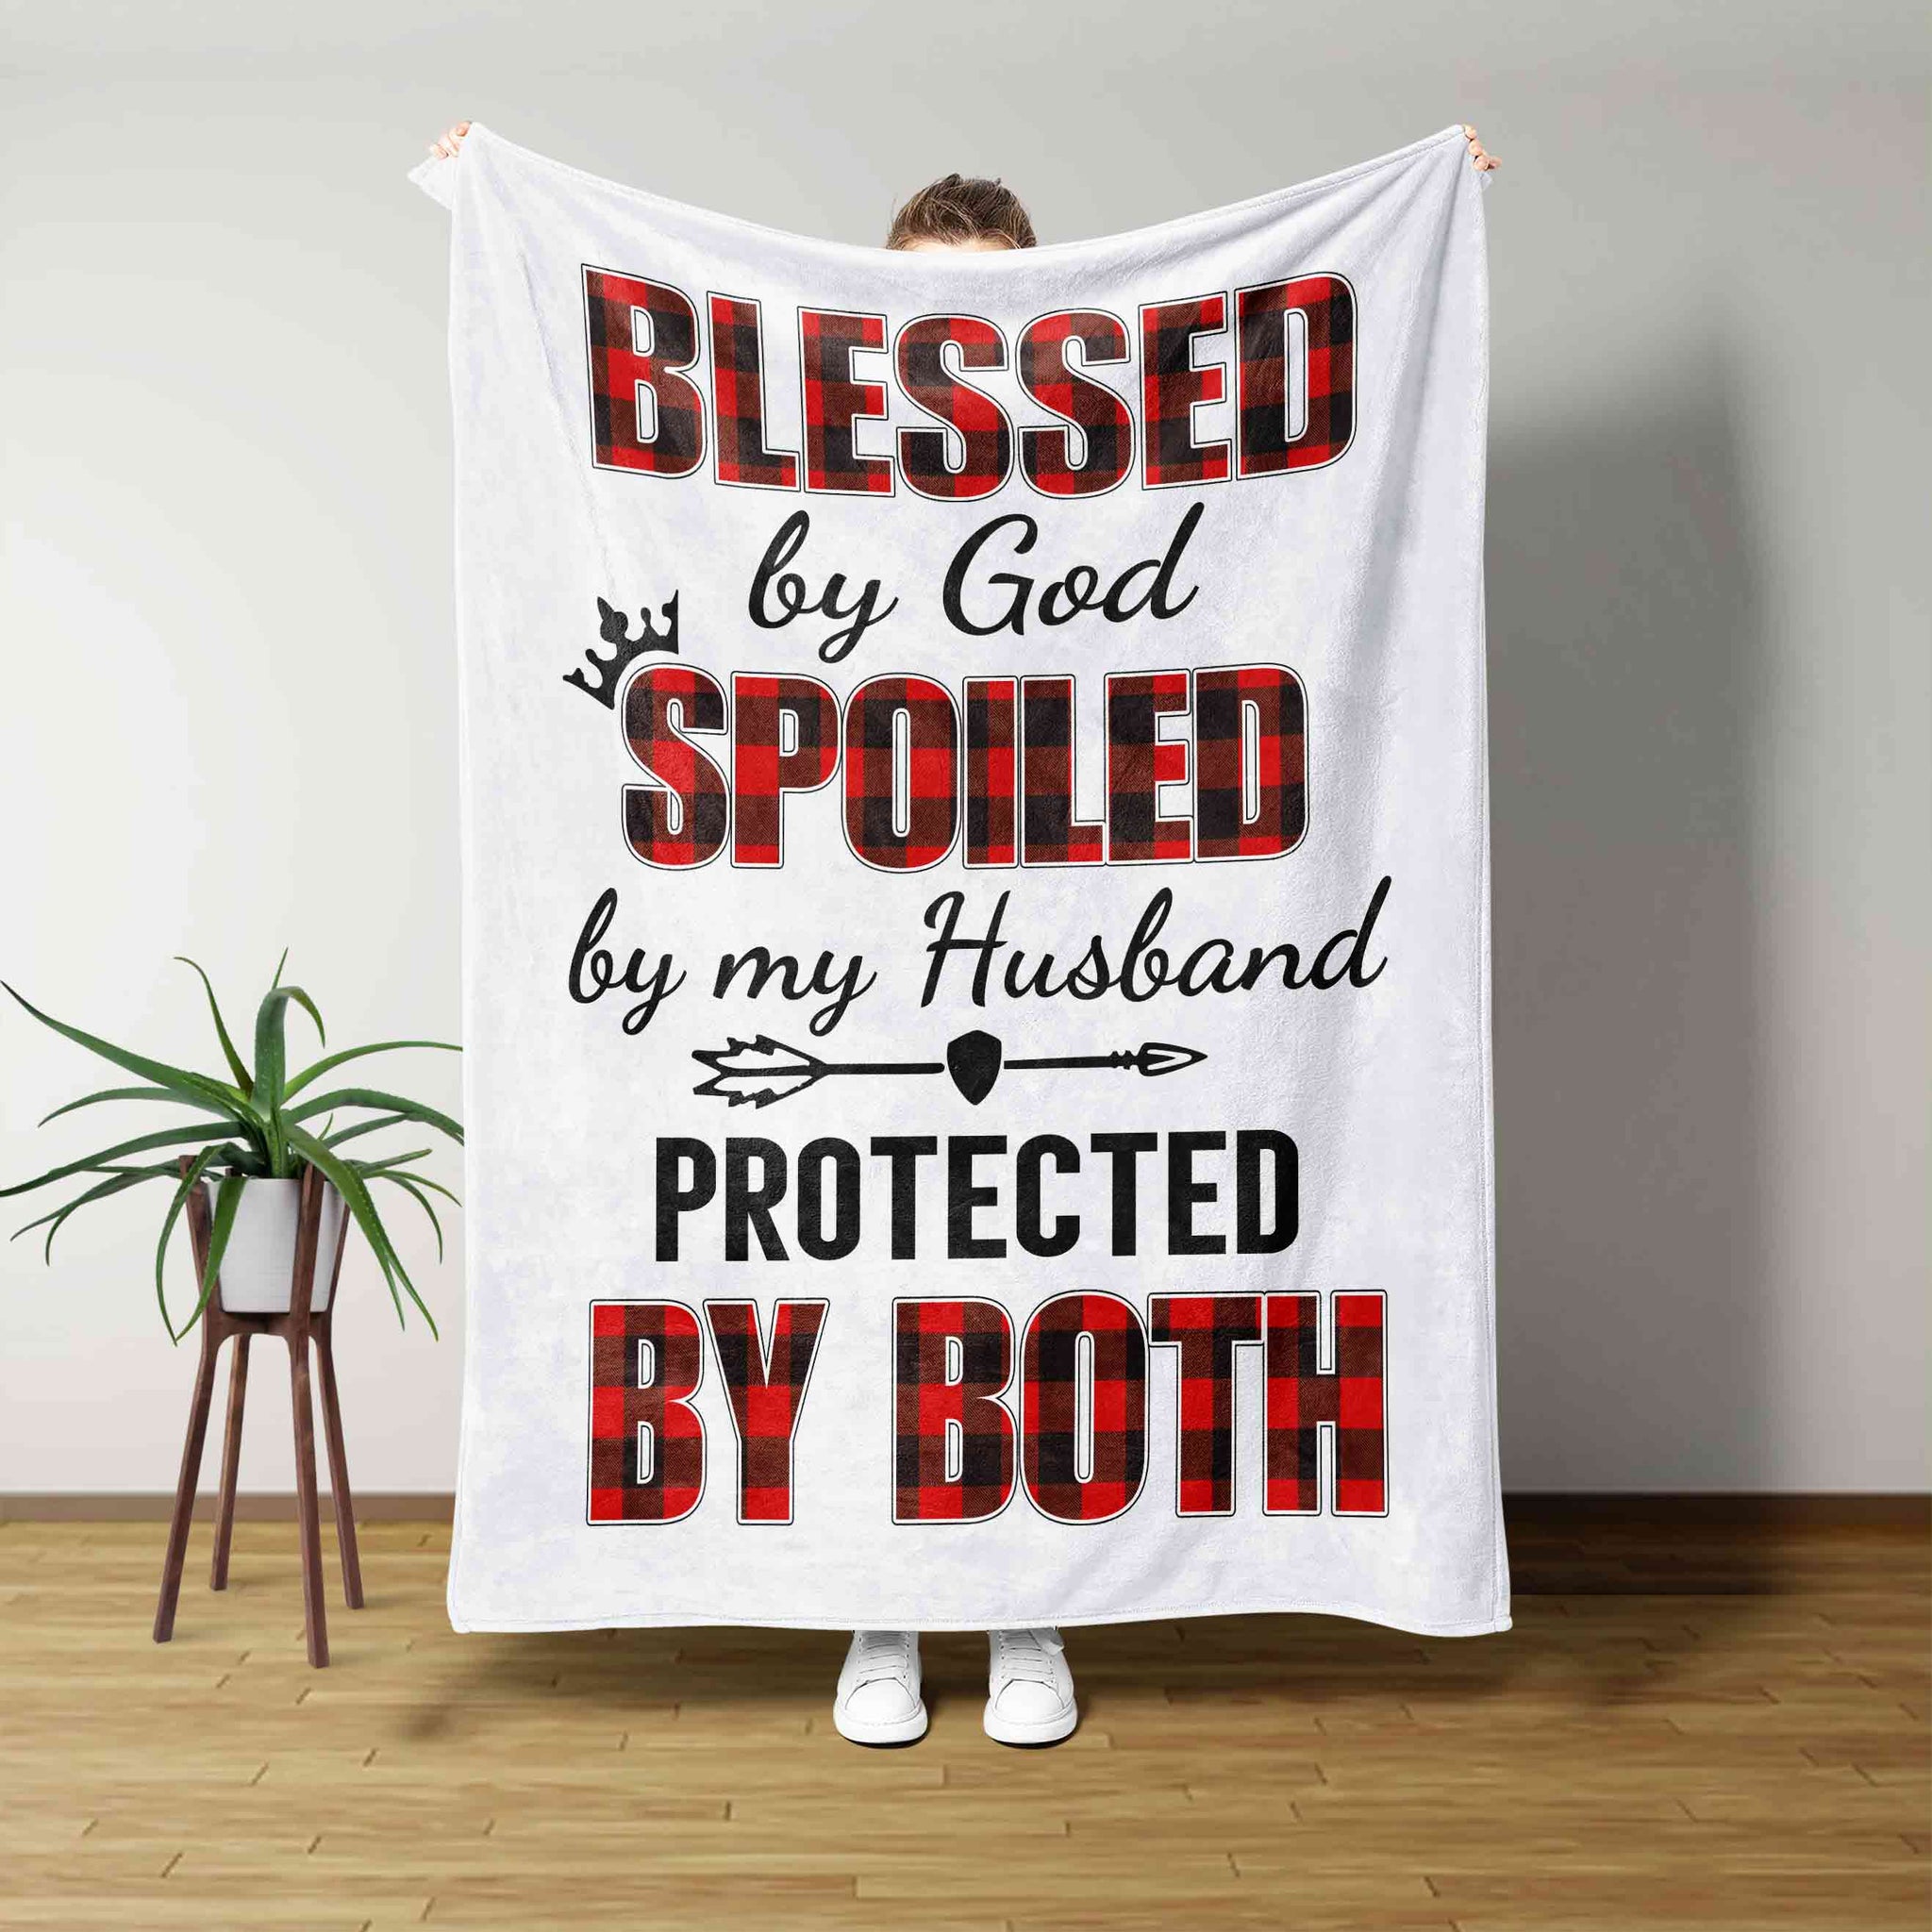 Blessed By God Blanket, Spoiled By My Husband Blanket, Arrow Blanket, Family Blanket, Gift Blanket